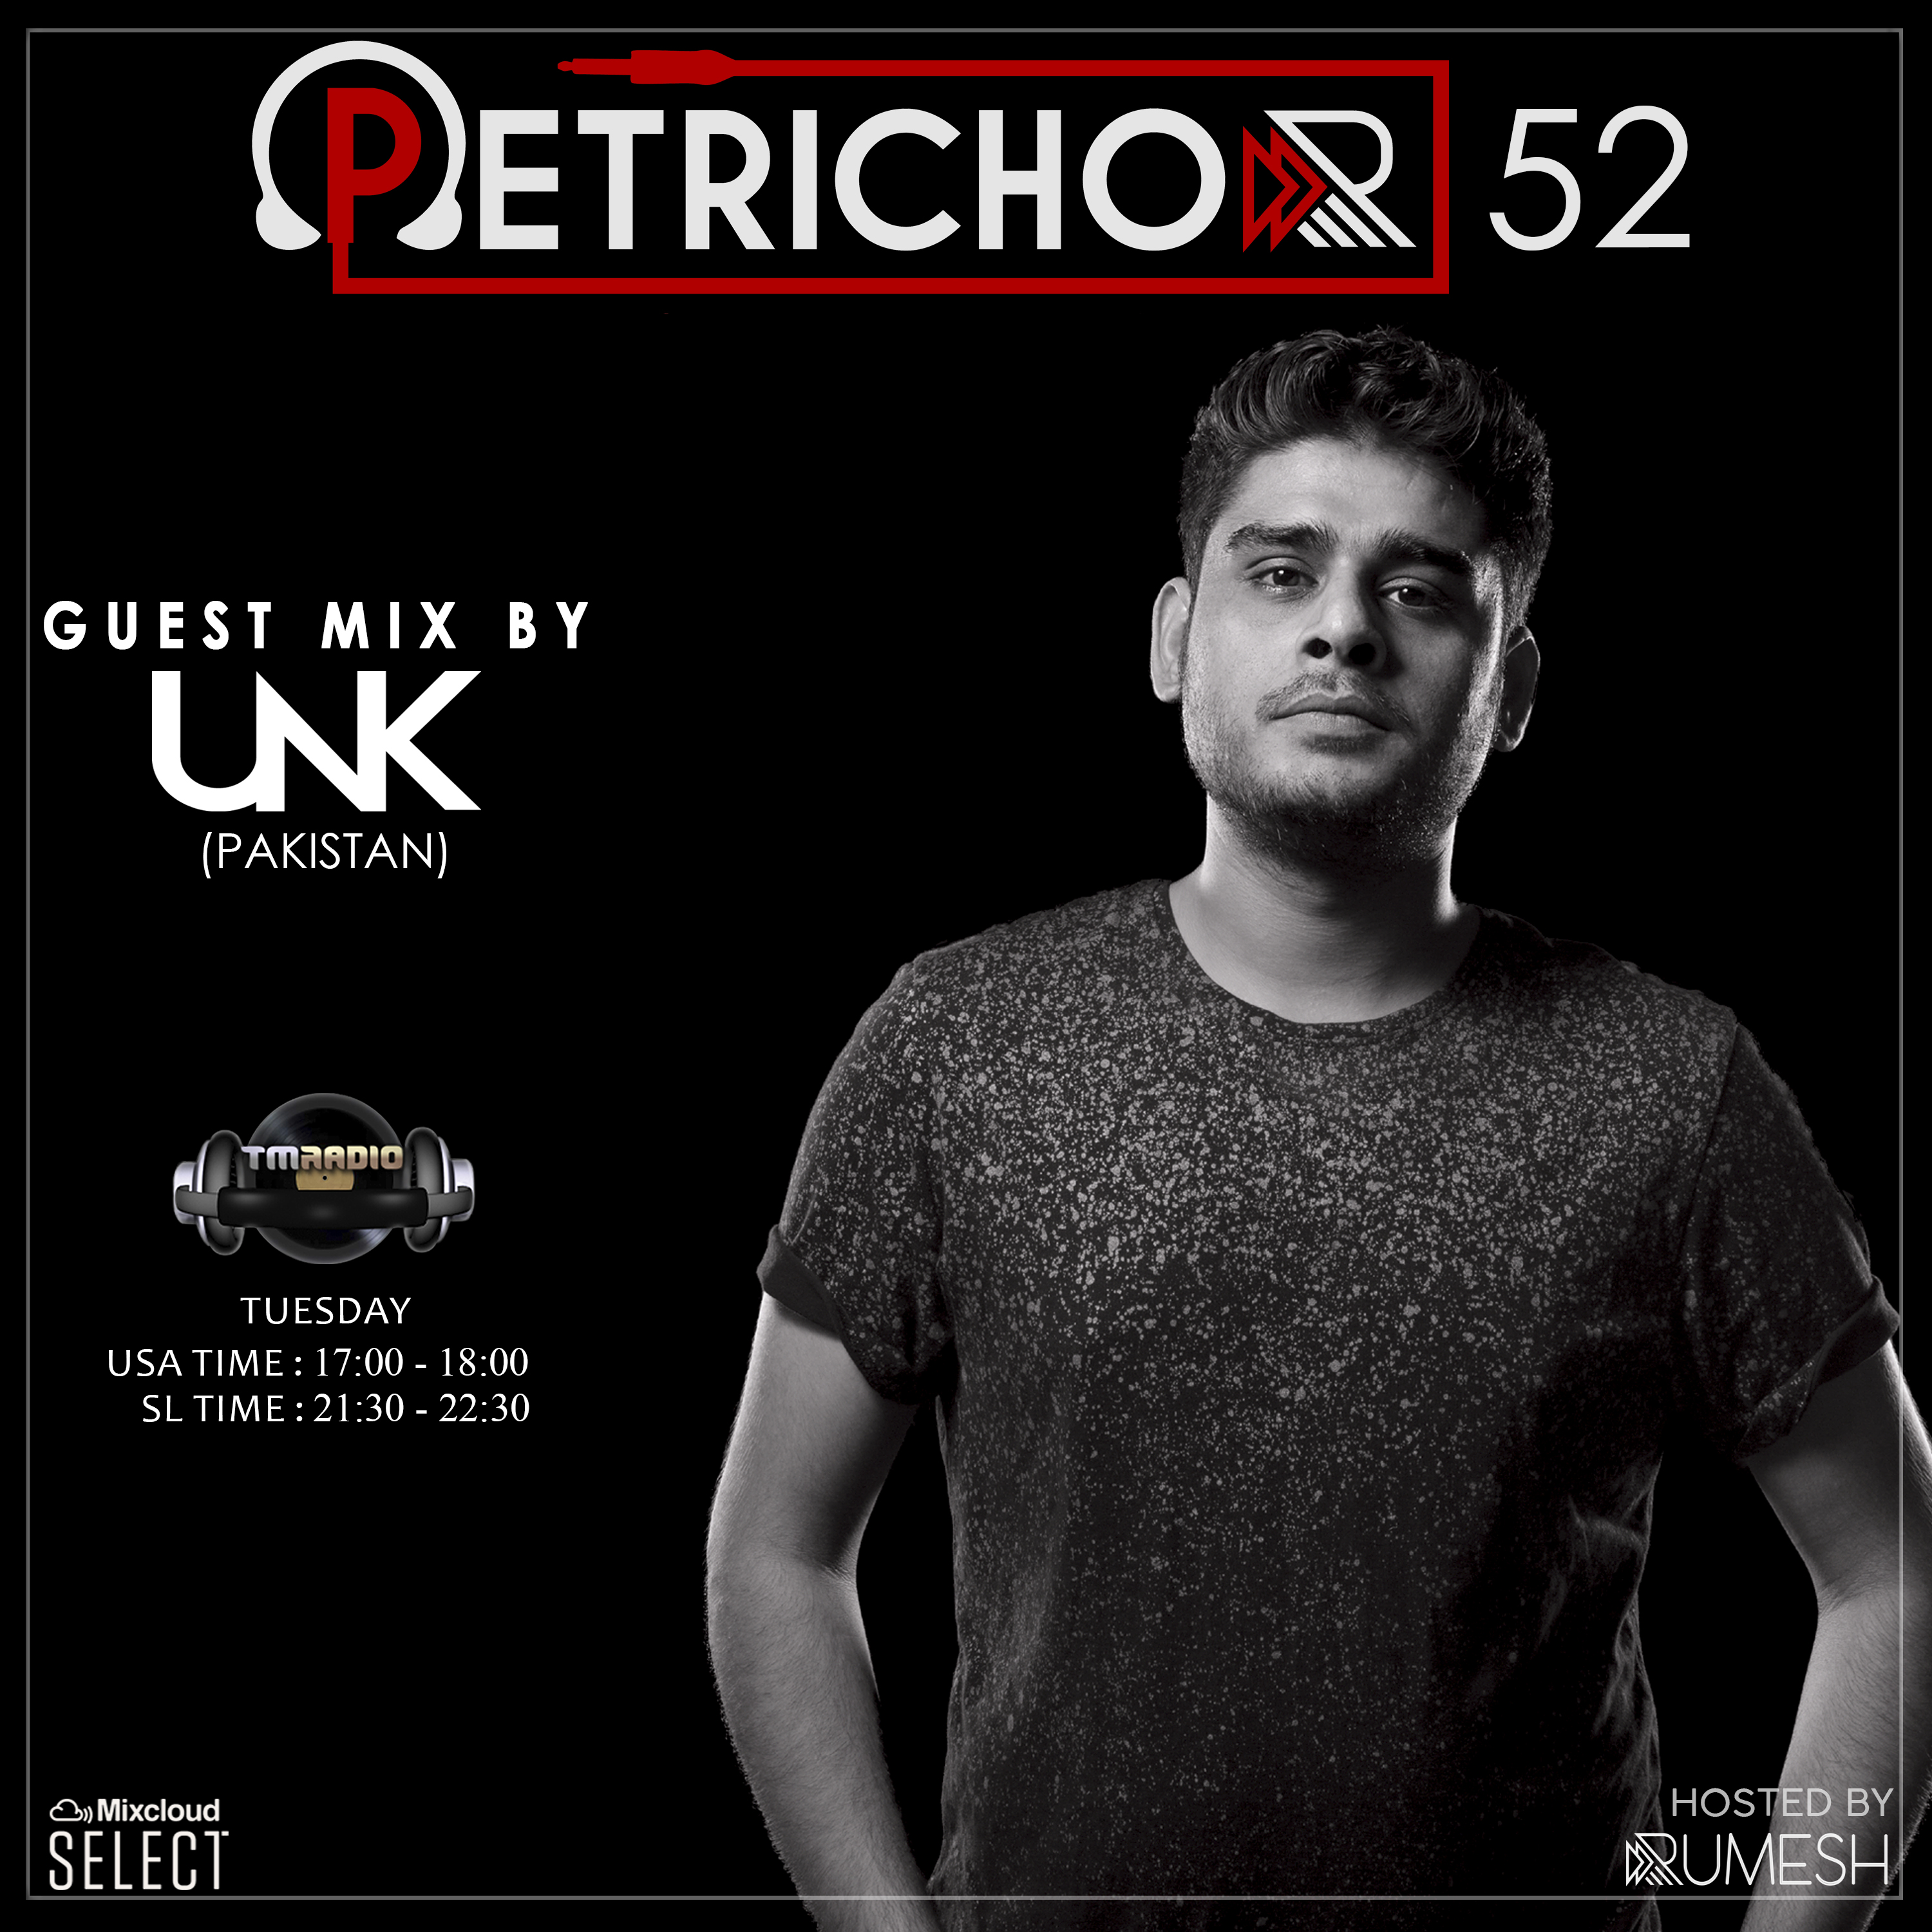 Petrichor :: Petrichor 52 guest mix by UNK (Pakistan) (aired on November 5th, 2019) banner logo